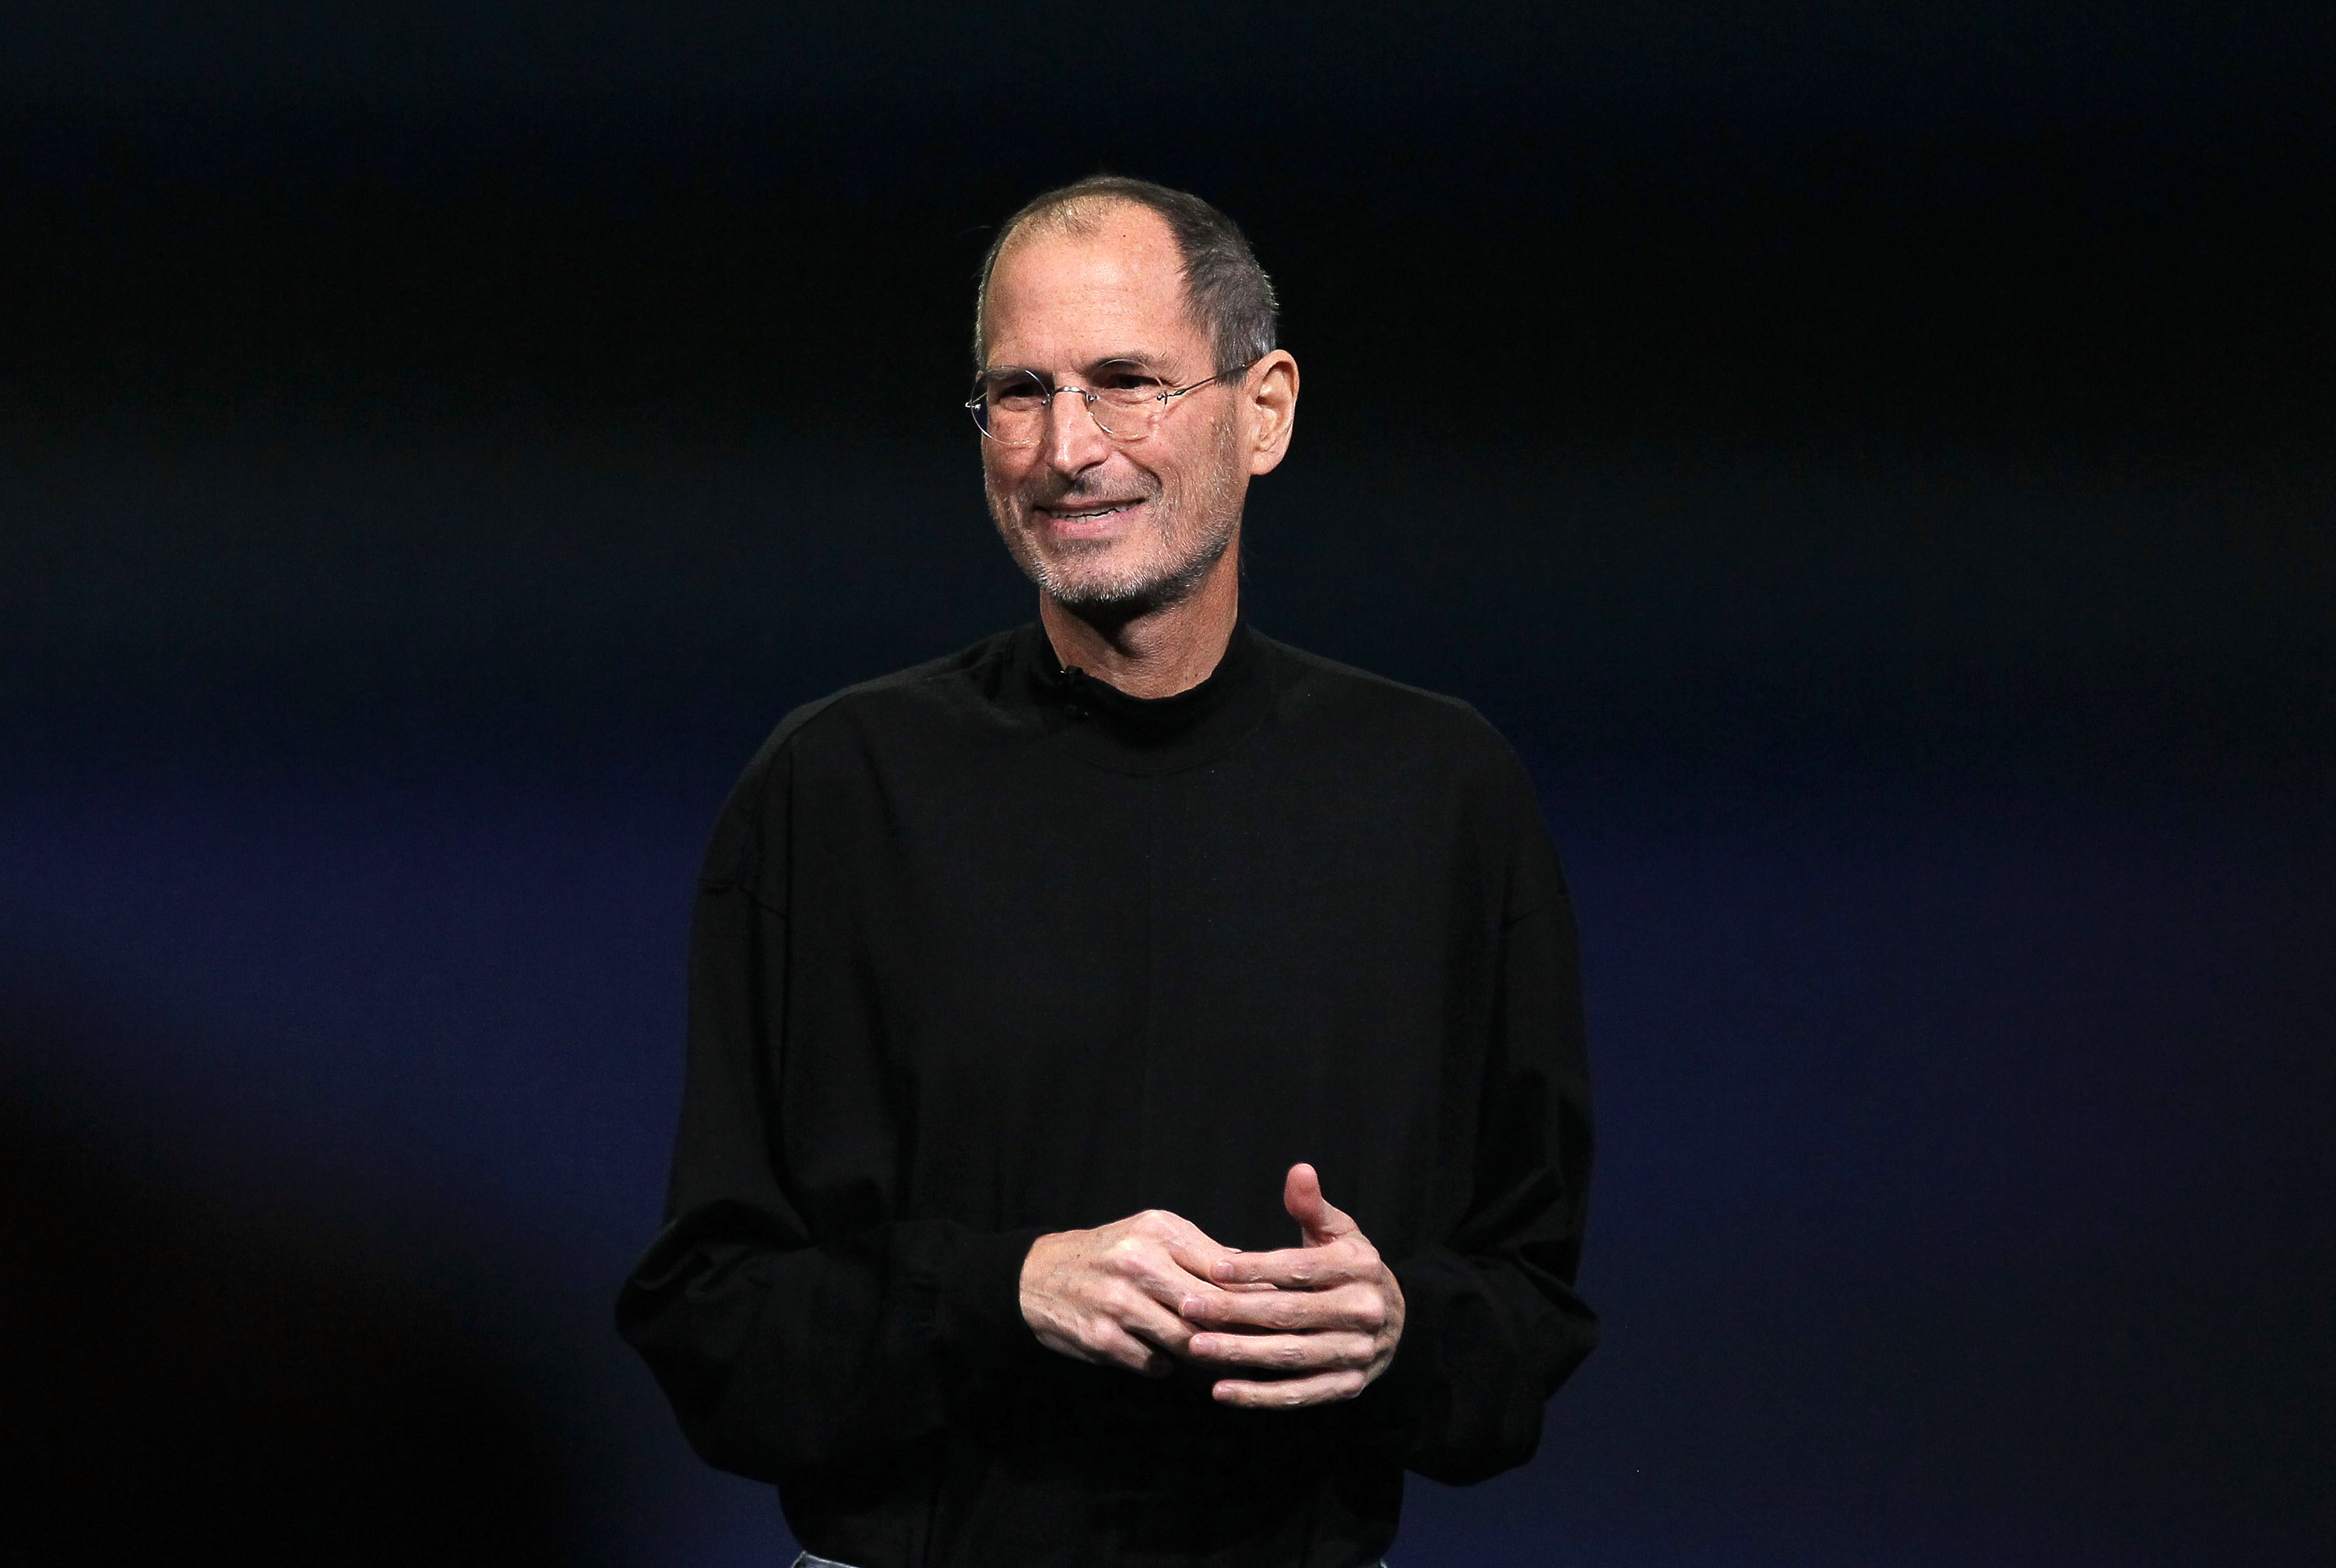 Apple CEO Steve Jobs speaks during an Apple Special event to unveil the new iPad 2 at the Yerba Buena Center for the Arts on March 2, 2011 in San Francisco. (Justin Sullivan—Getty Images)